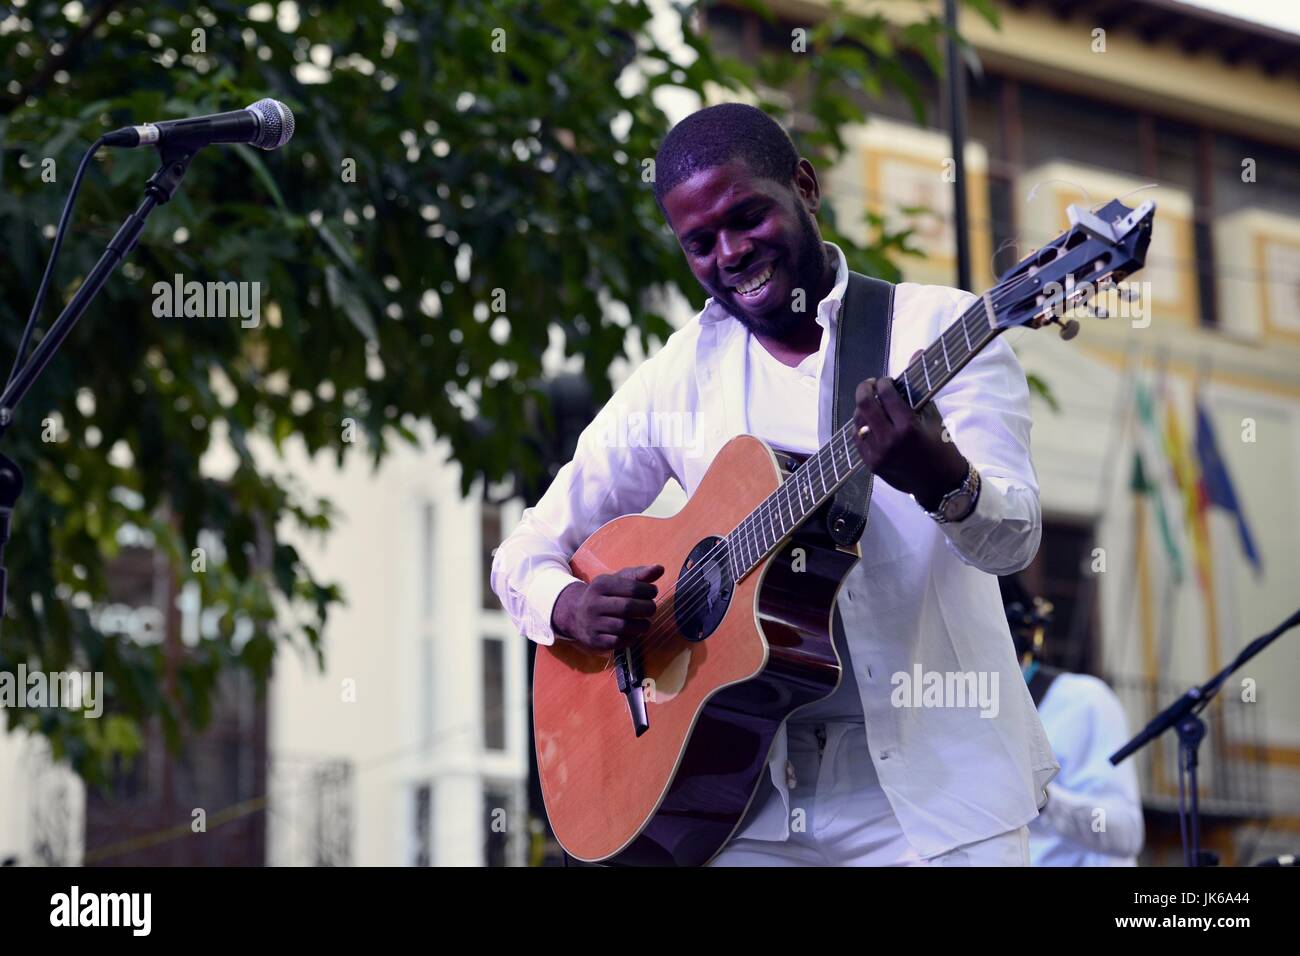 Alcala la Real, Jaen, Spain. 21st July, 2017. Etnosur festival. Toto St. Serpio Tomas 'Toto' was born in Luanda (Angola, Africa), during his performance on the stage of Etnosur. Etnosur is a festival of ethnic music that is celebrated annually in the south of Spain. M.Ramirez/Alamy Live News Stock Photo